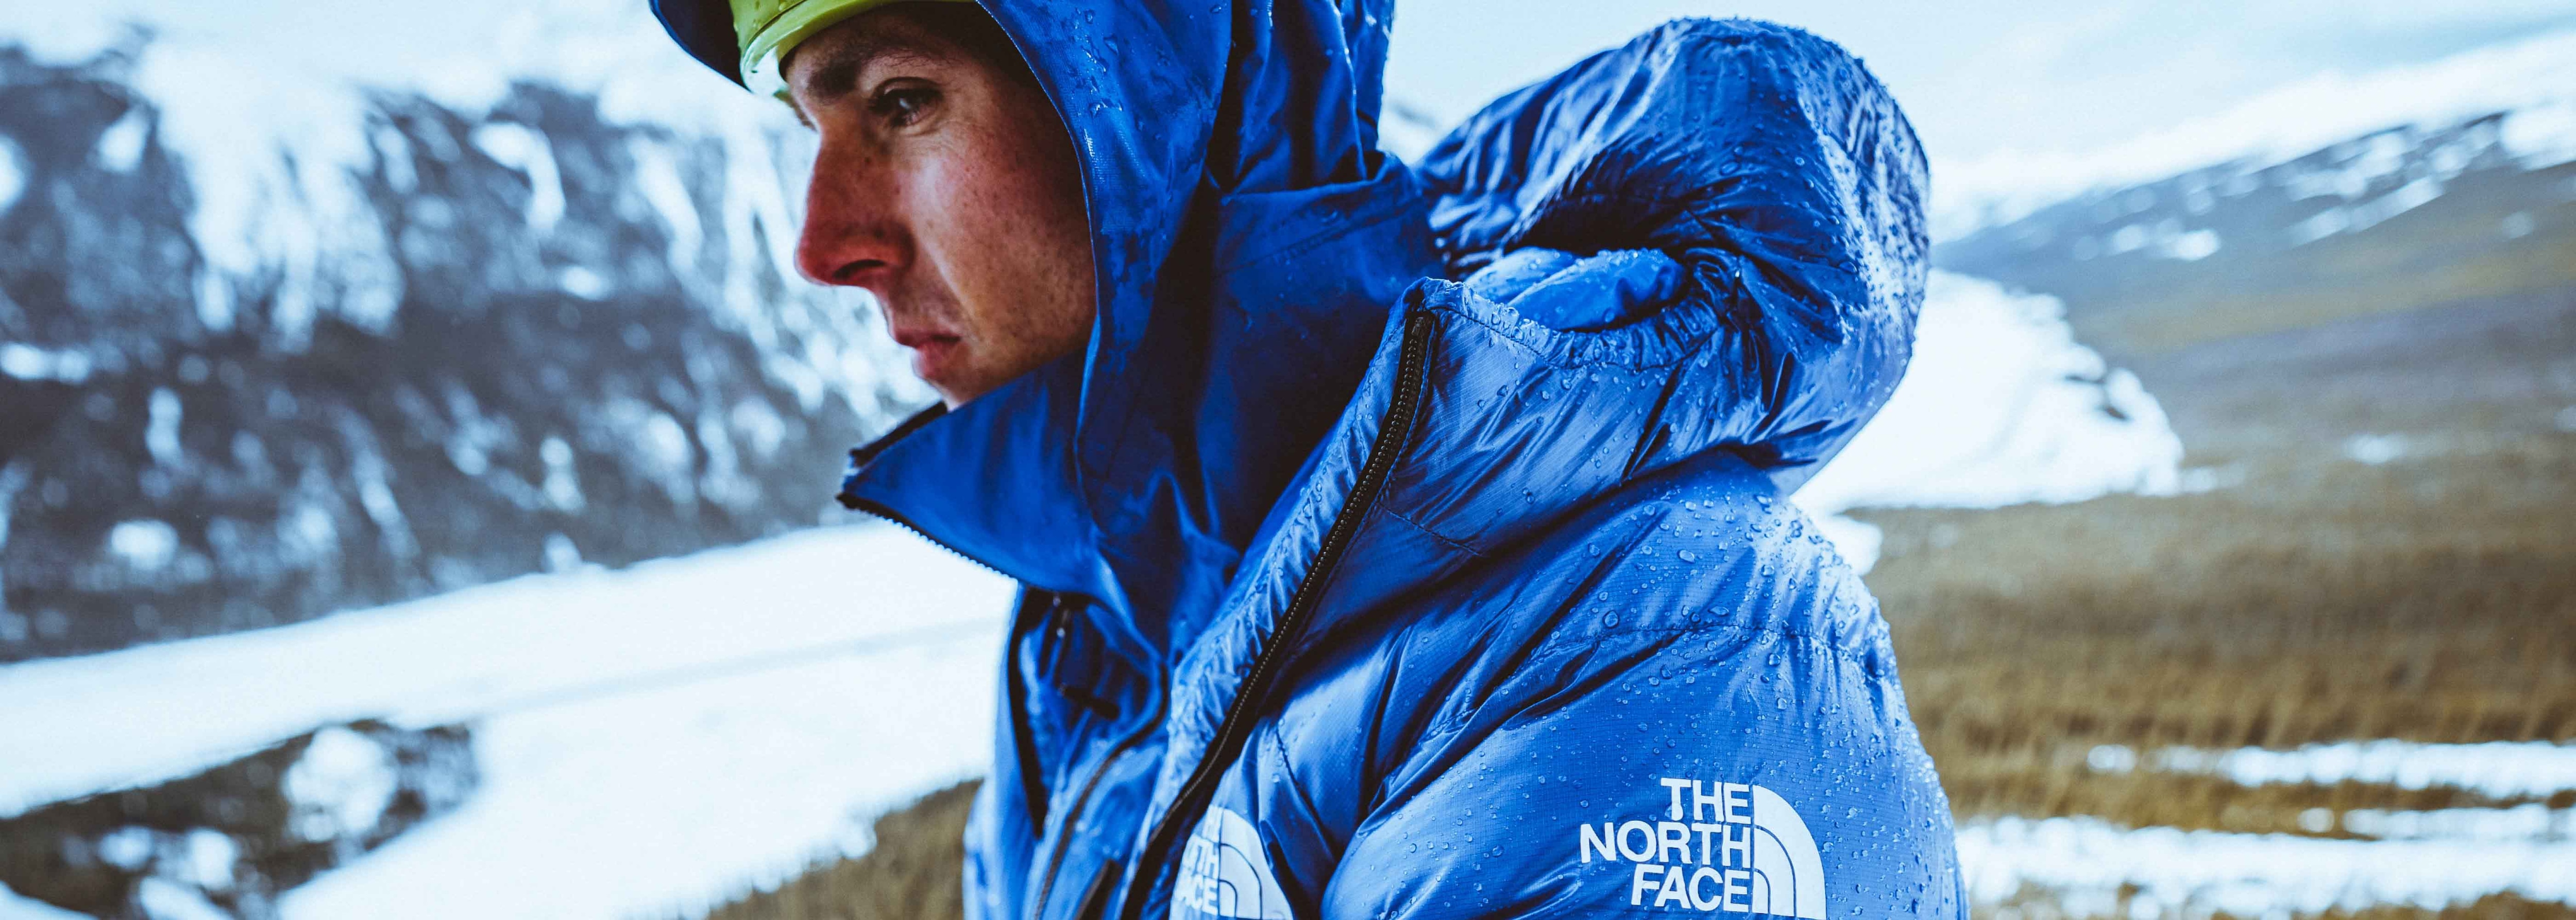 The north face - 8